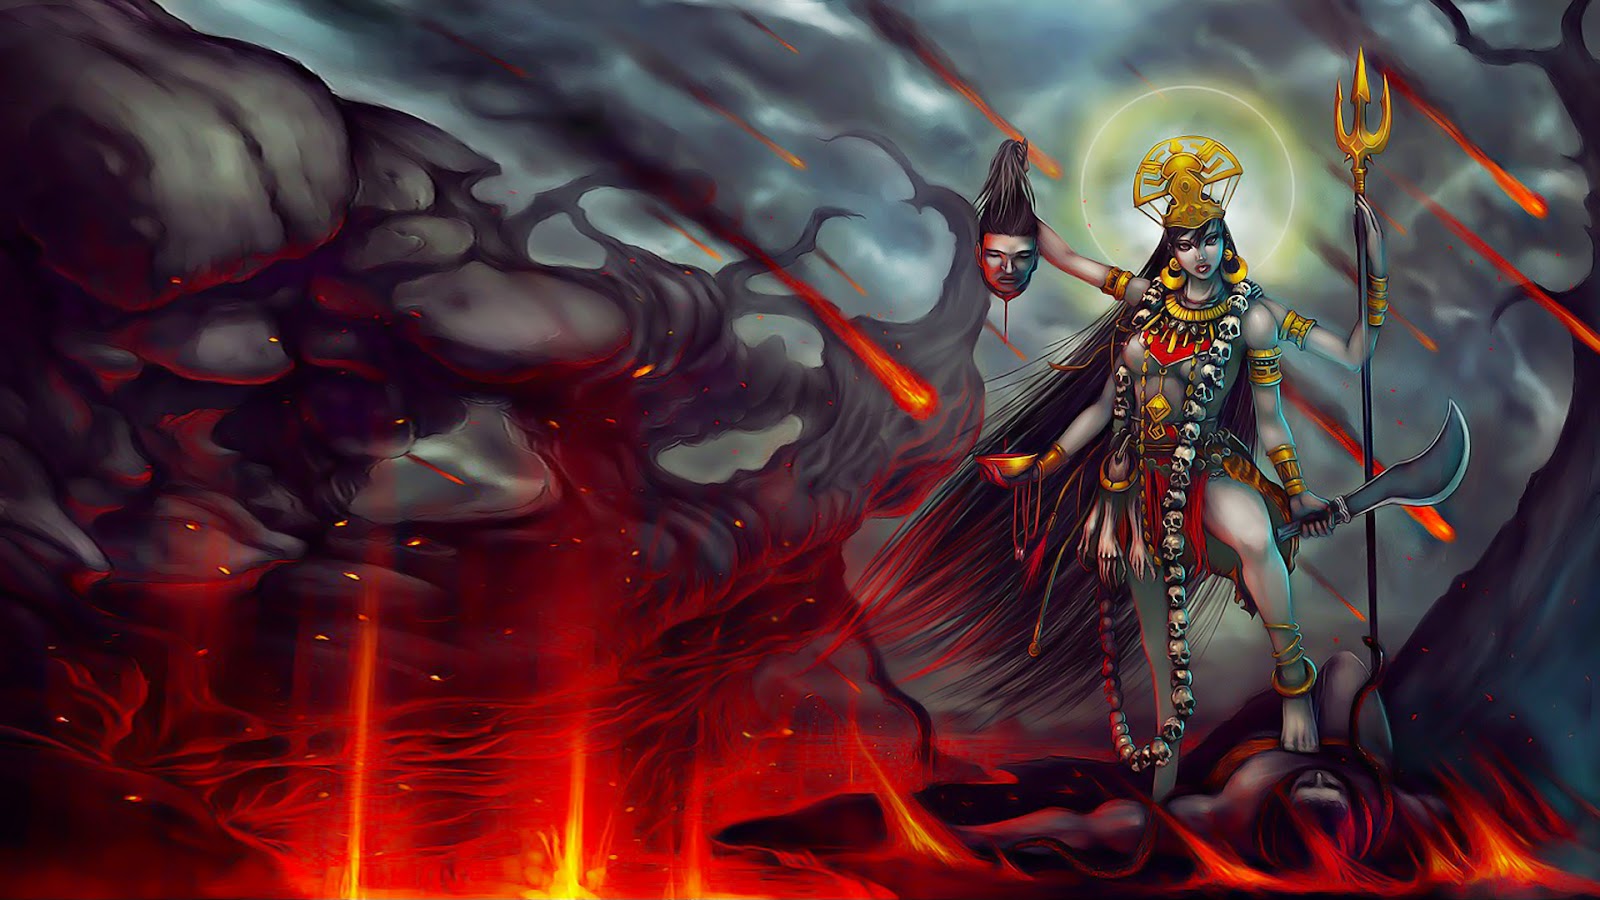 15 reasons why Lord Shiva is the original alpha male